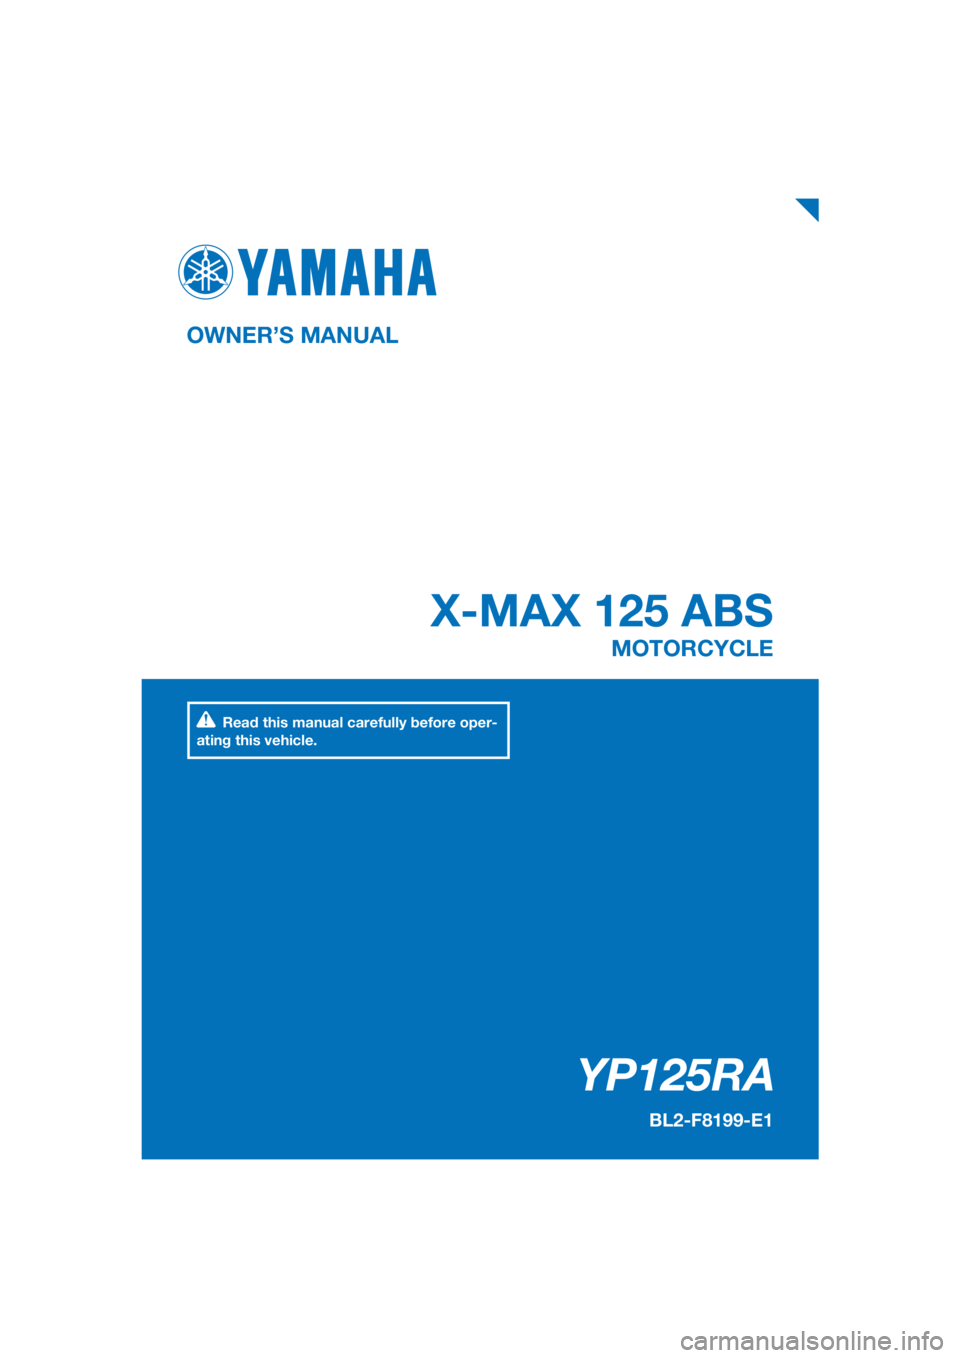 YAMAHA XMAX 125 2018  Owners Manual PANTONE285C
YP125RA
X-MAX 125 ABS
OWNER’S MANUALMOTORCYCLE
[English  (E)]
Read this manual carefully before oper-
ating this vehicle.
BL2-F8199-E1 